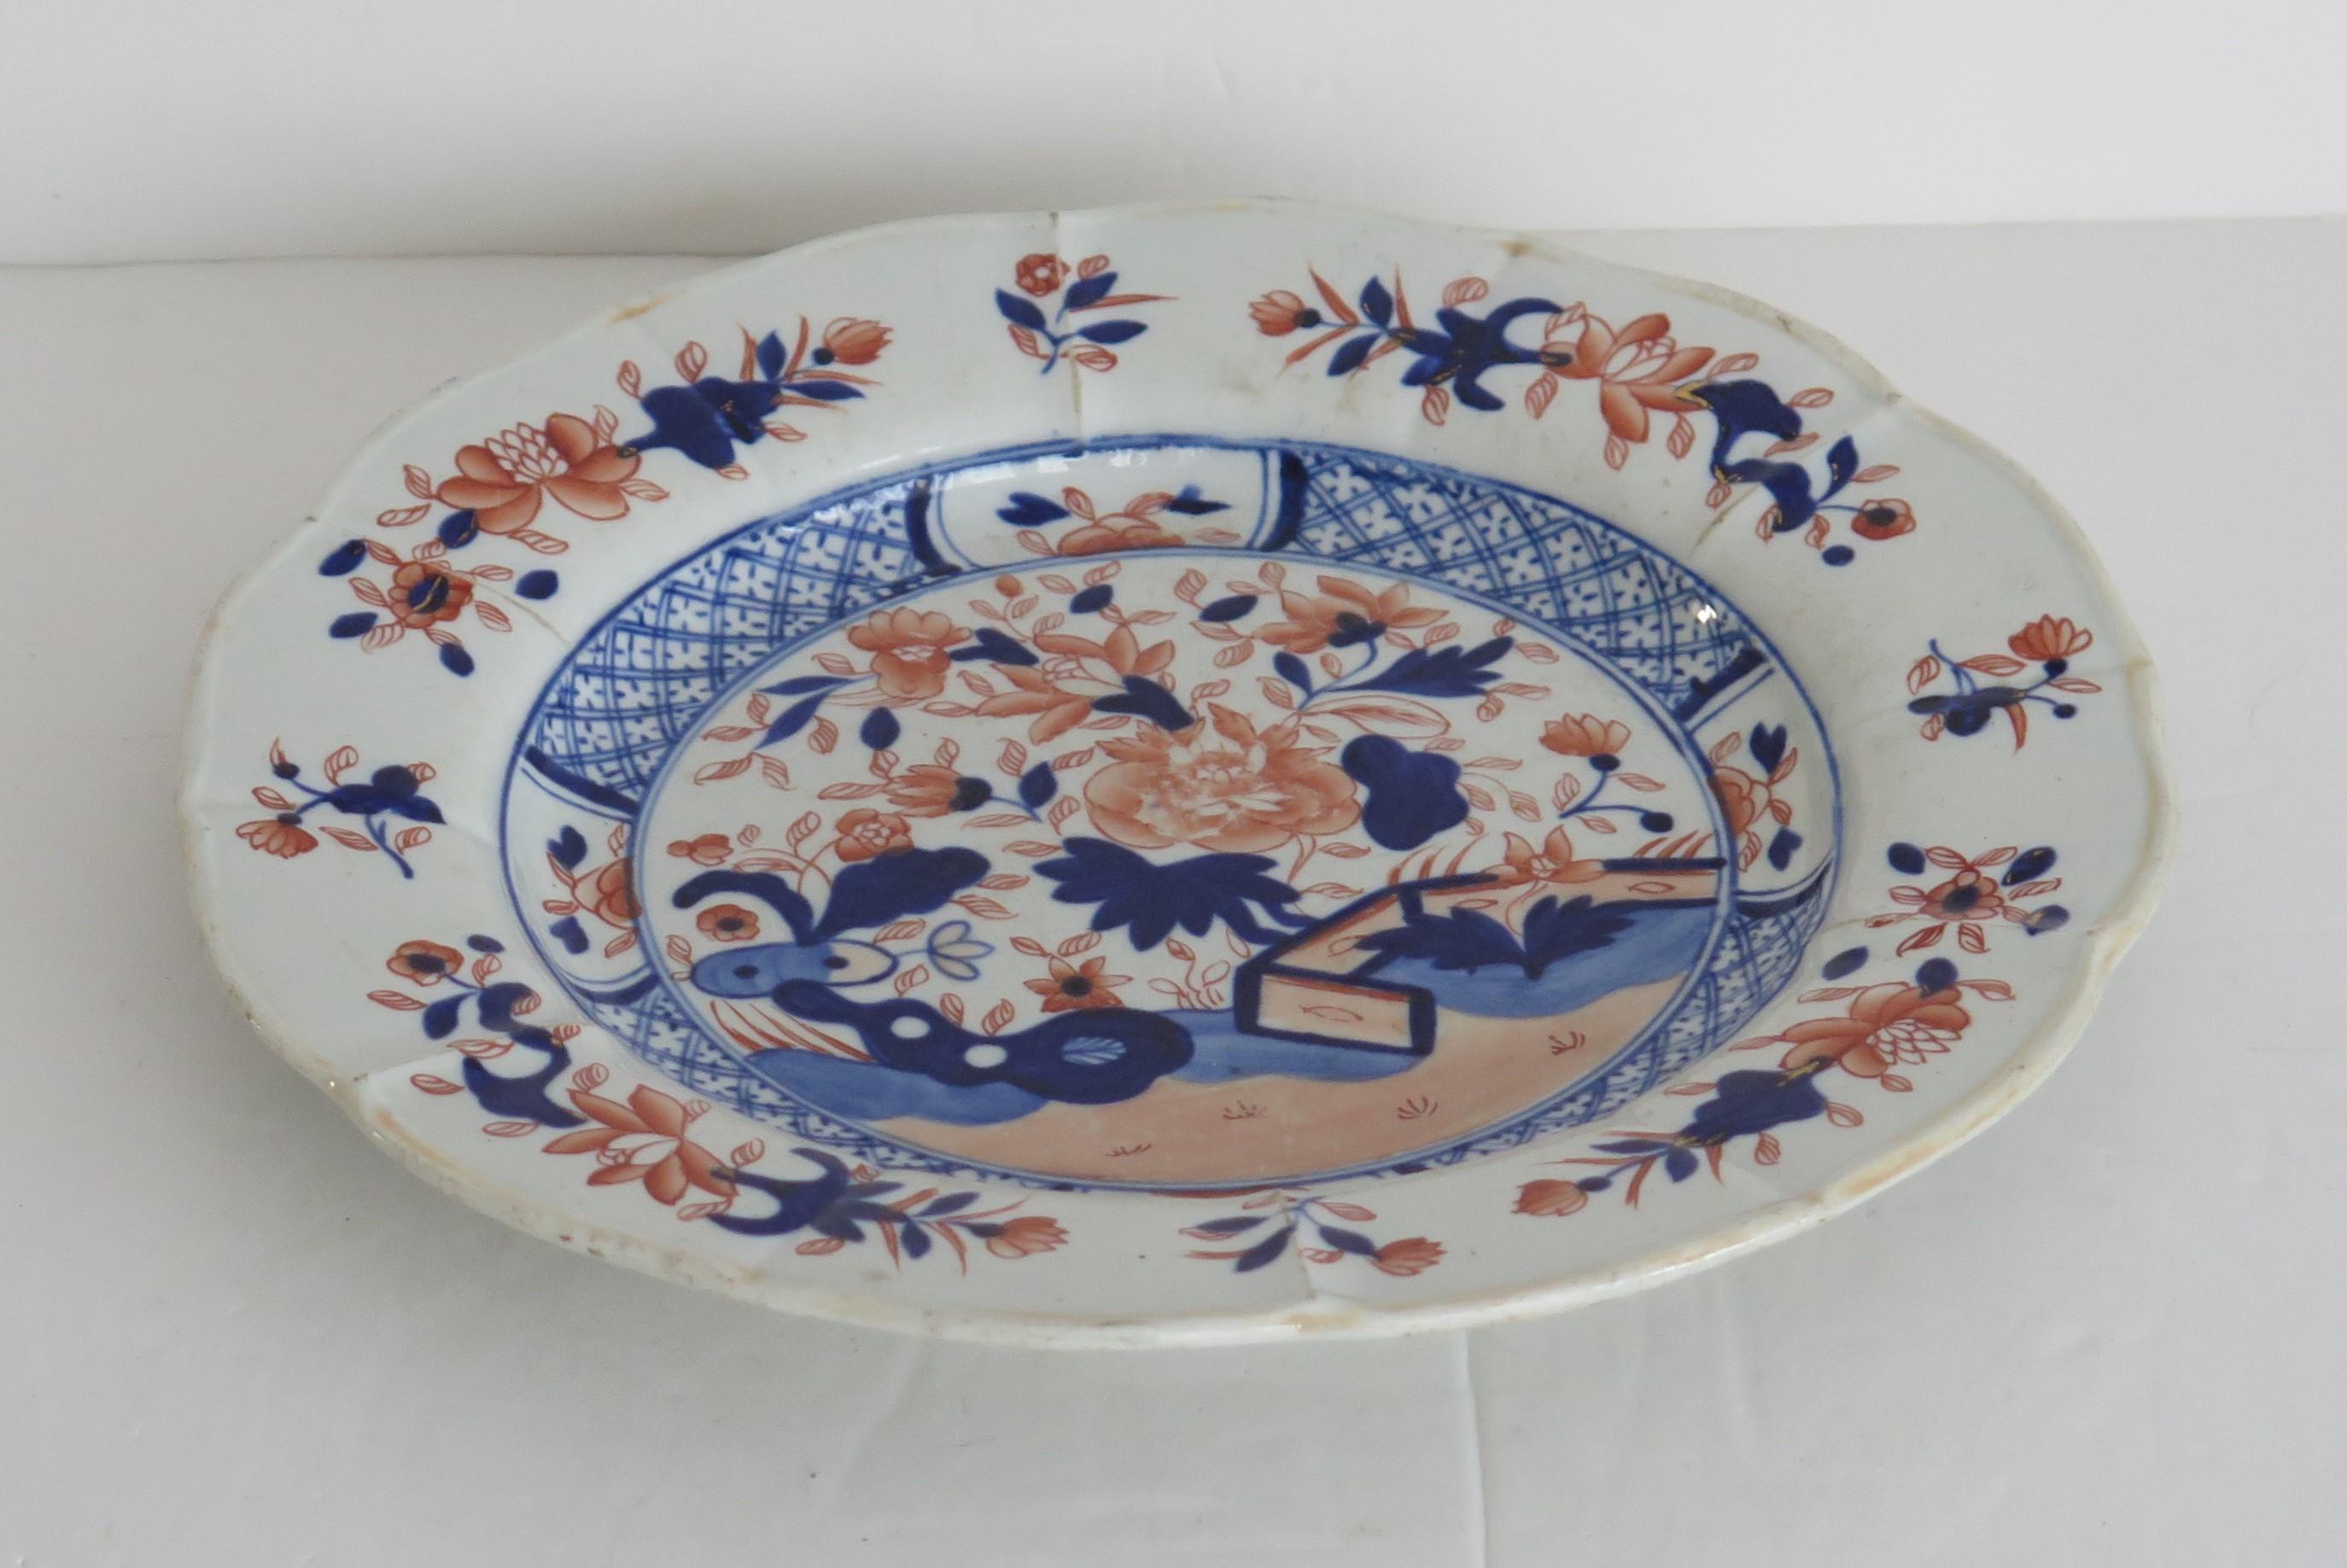 This is a good decorative Ironstone pottery desert plate or dish produced by the Mason's factory at Lane Delph, Staffordshire, England, circa 1815.

The plate is circular with radial ribs and a lobed rim.

This desert plate is beautifully